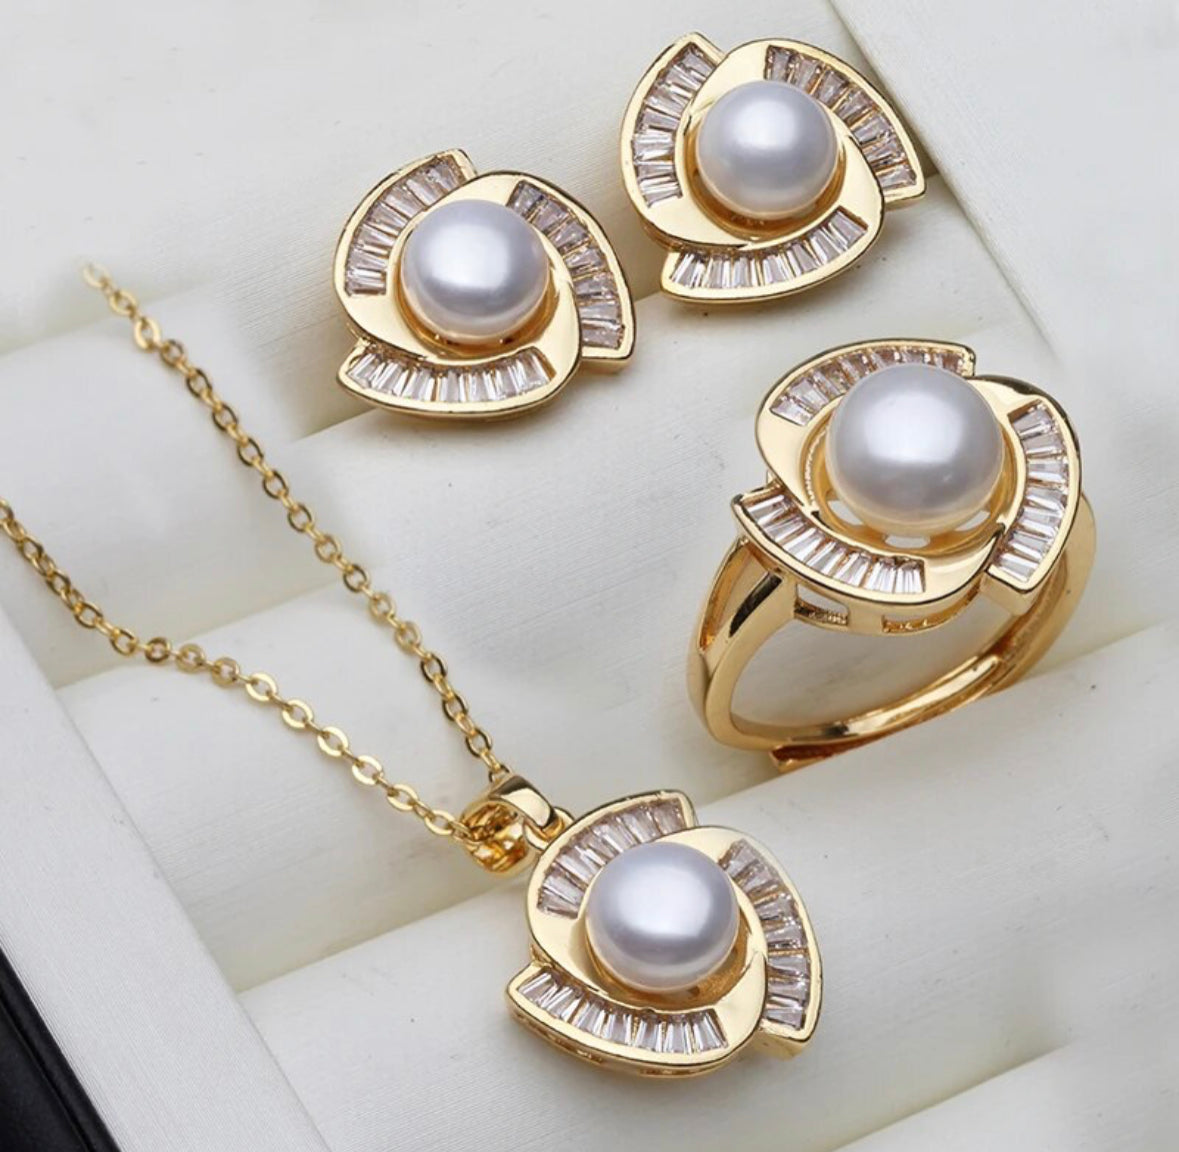 New Real Pearl Necklace And Earring Set For Women,18K Gold Plated Pearl Jewelry set